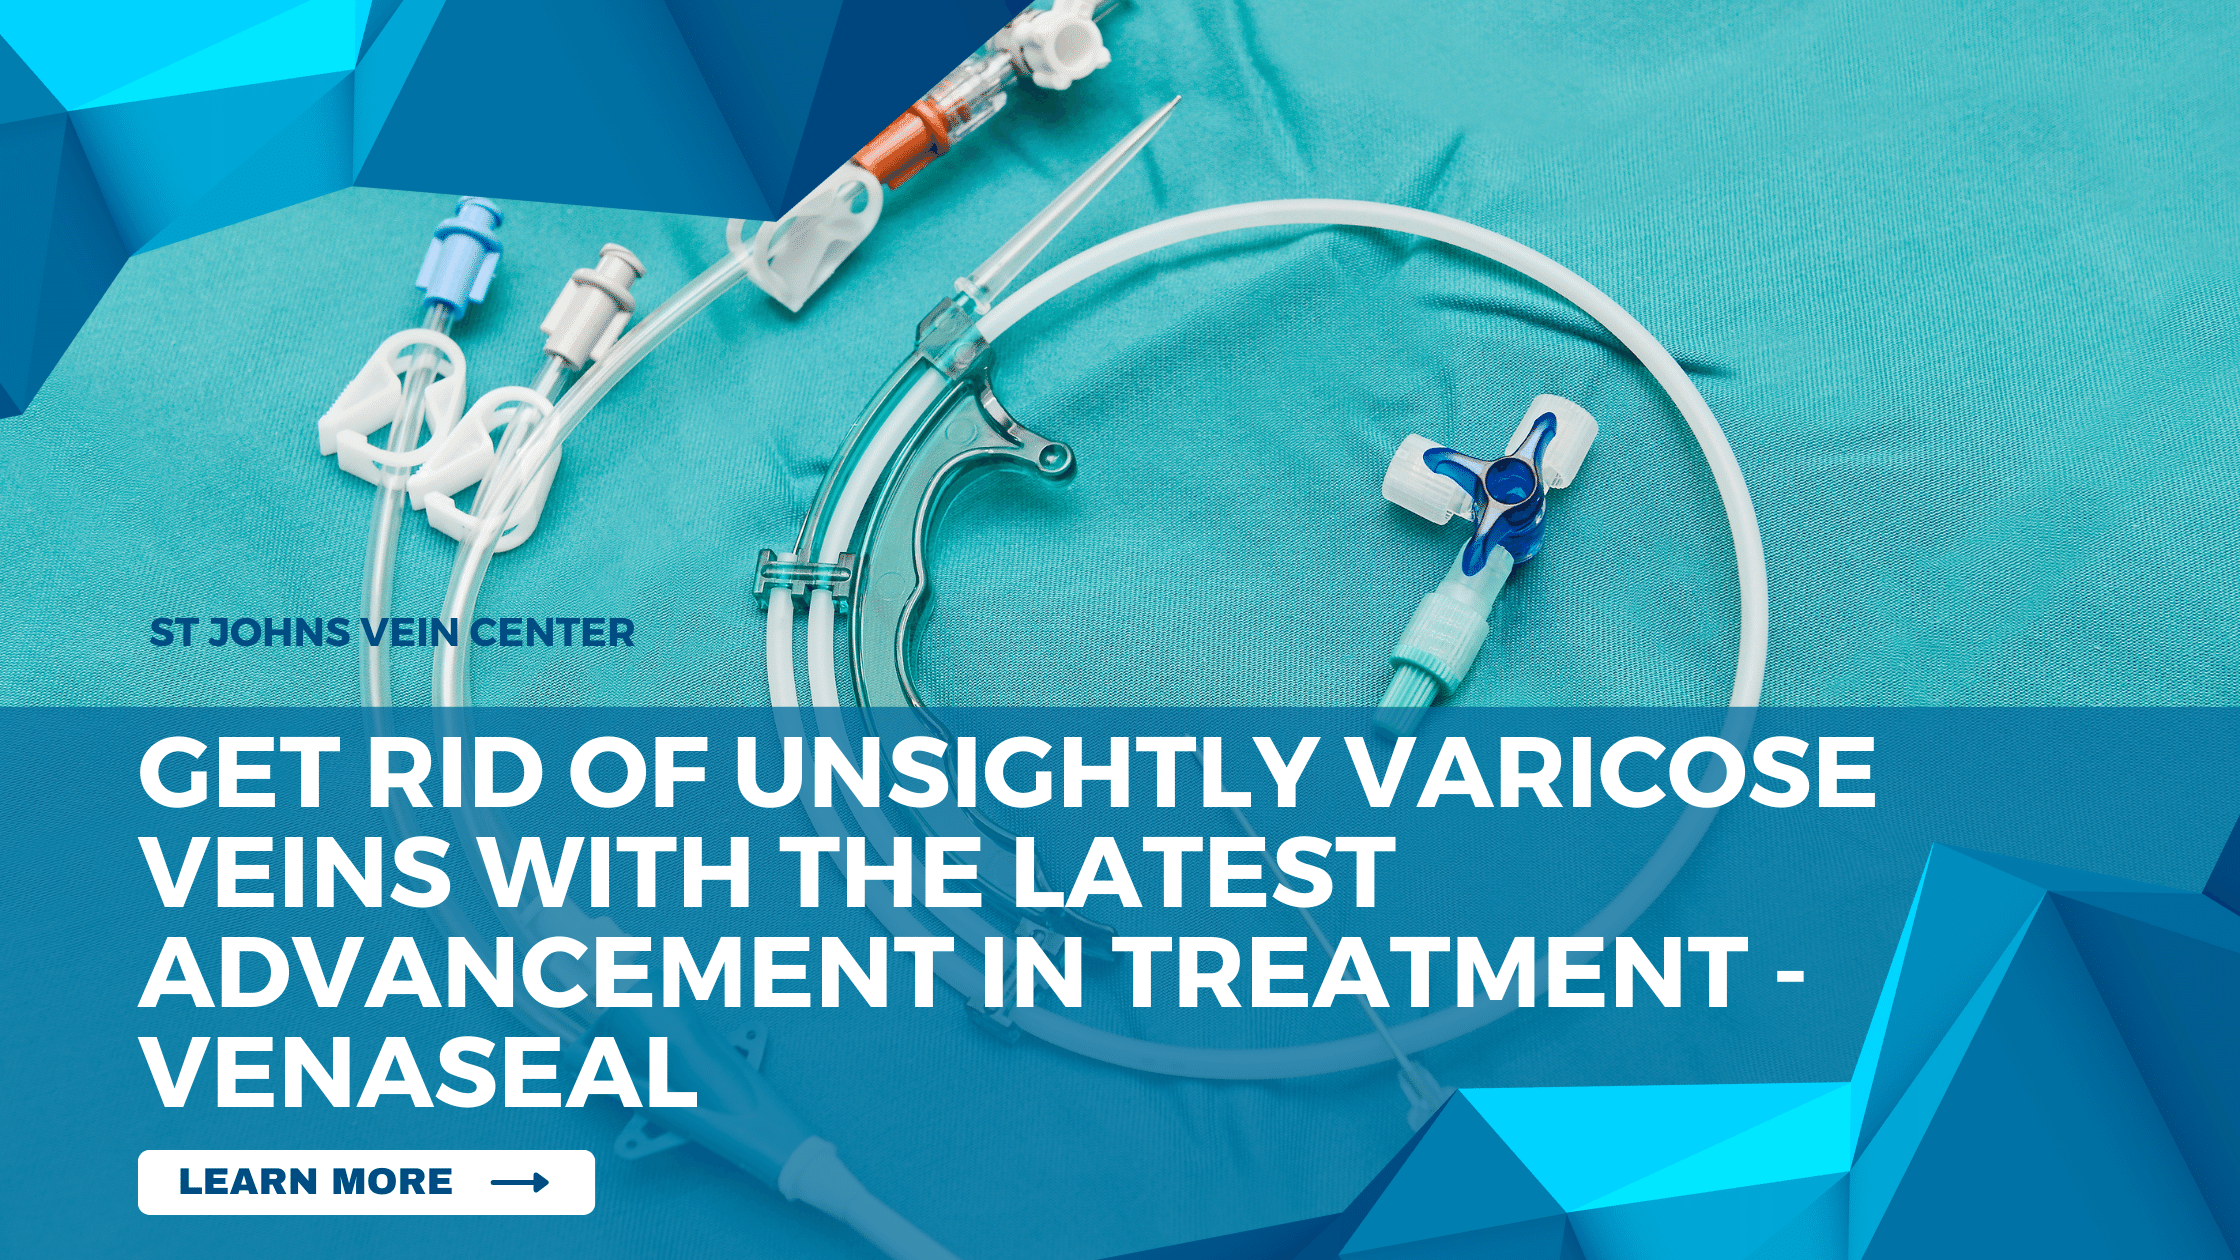 Get Rid of Unsightly Varicose Veins with the Latest Advancement in Treatment - Venaseal